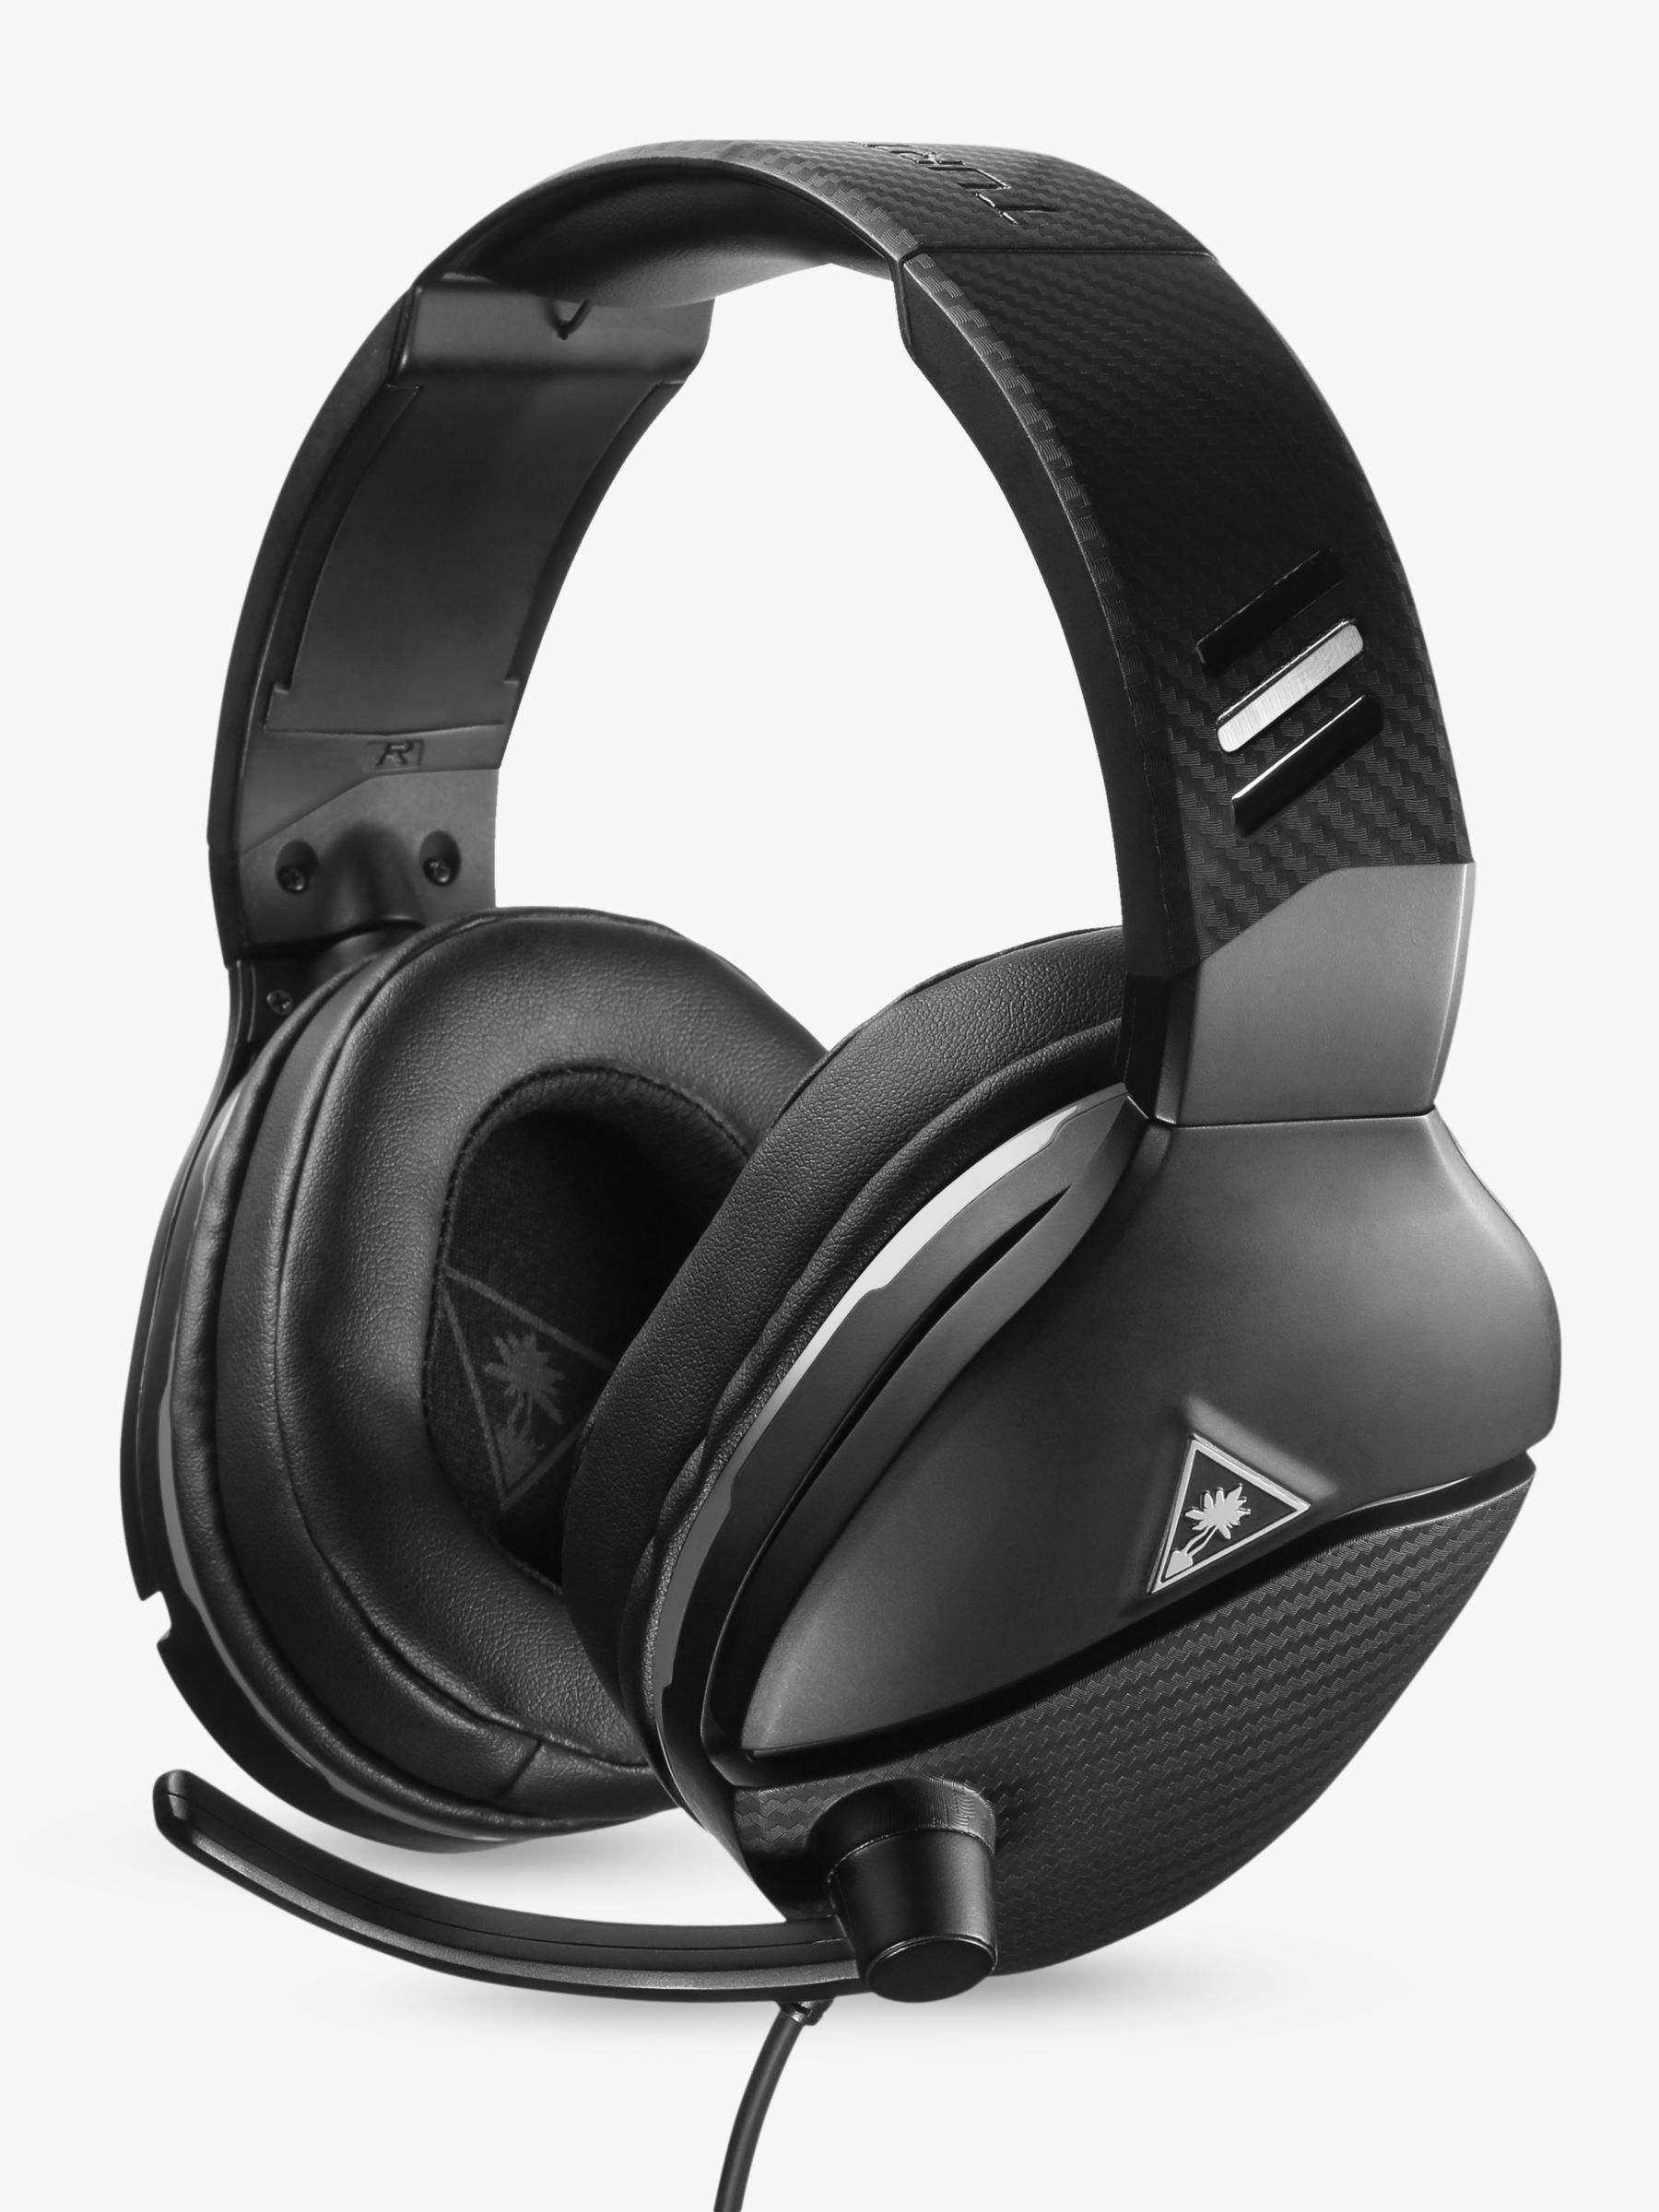 can ps4 turtle beach headset work on xbox one